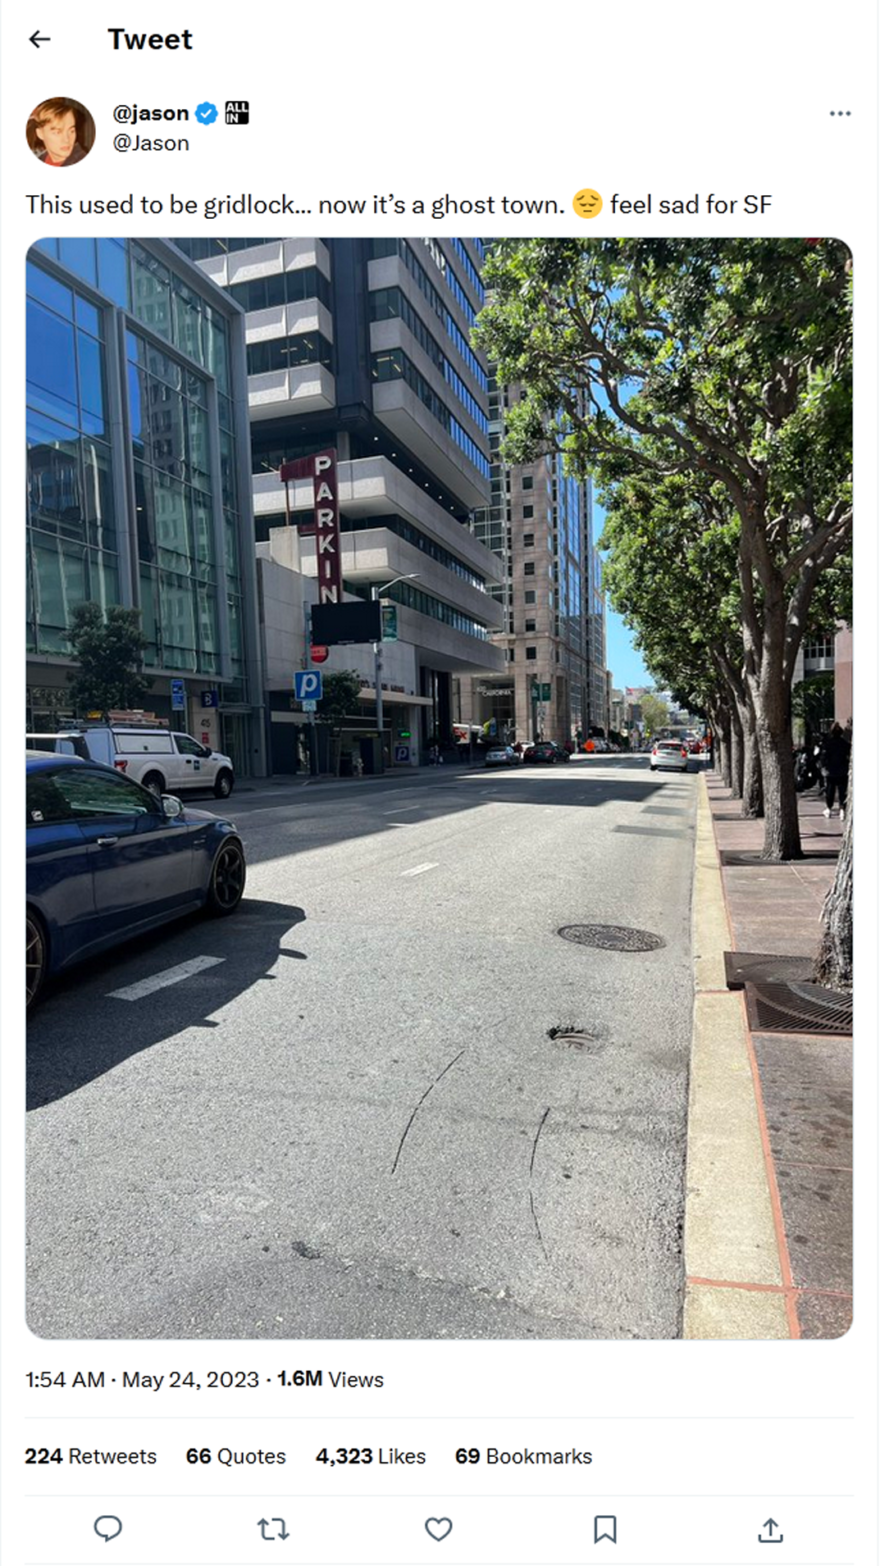 jason-tweet-23May2023-This used to be gridlock-now it’s a ghost town-SF